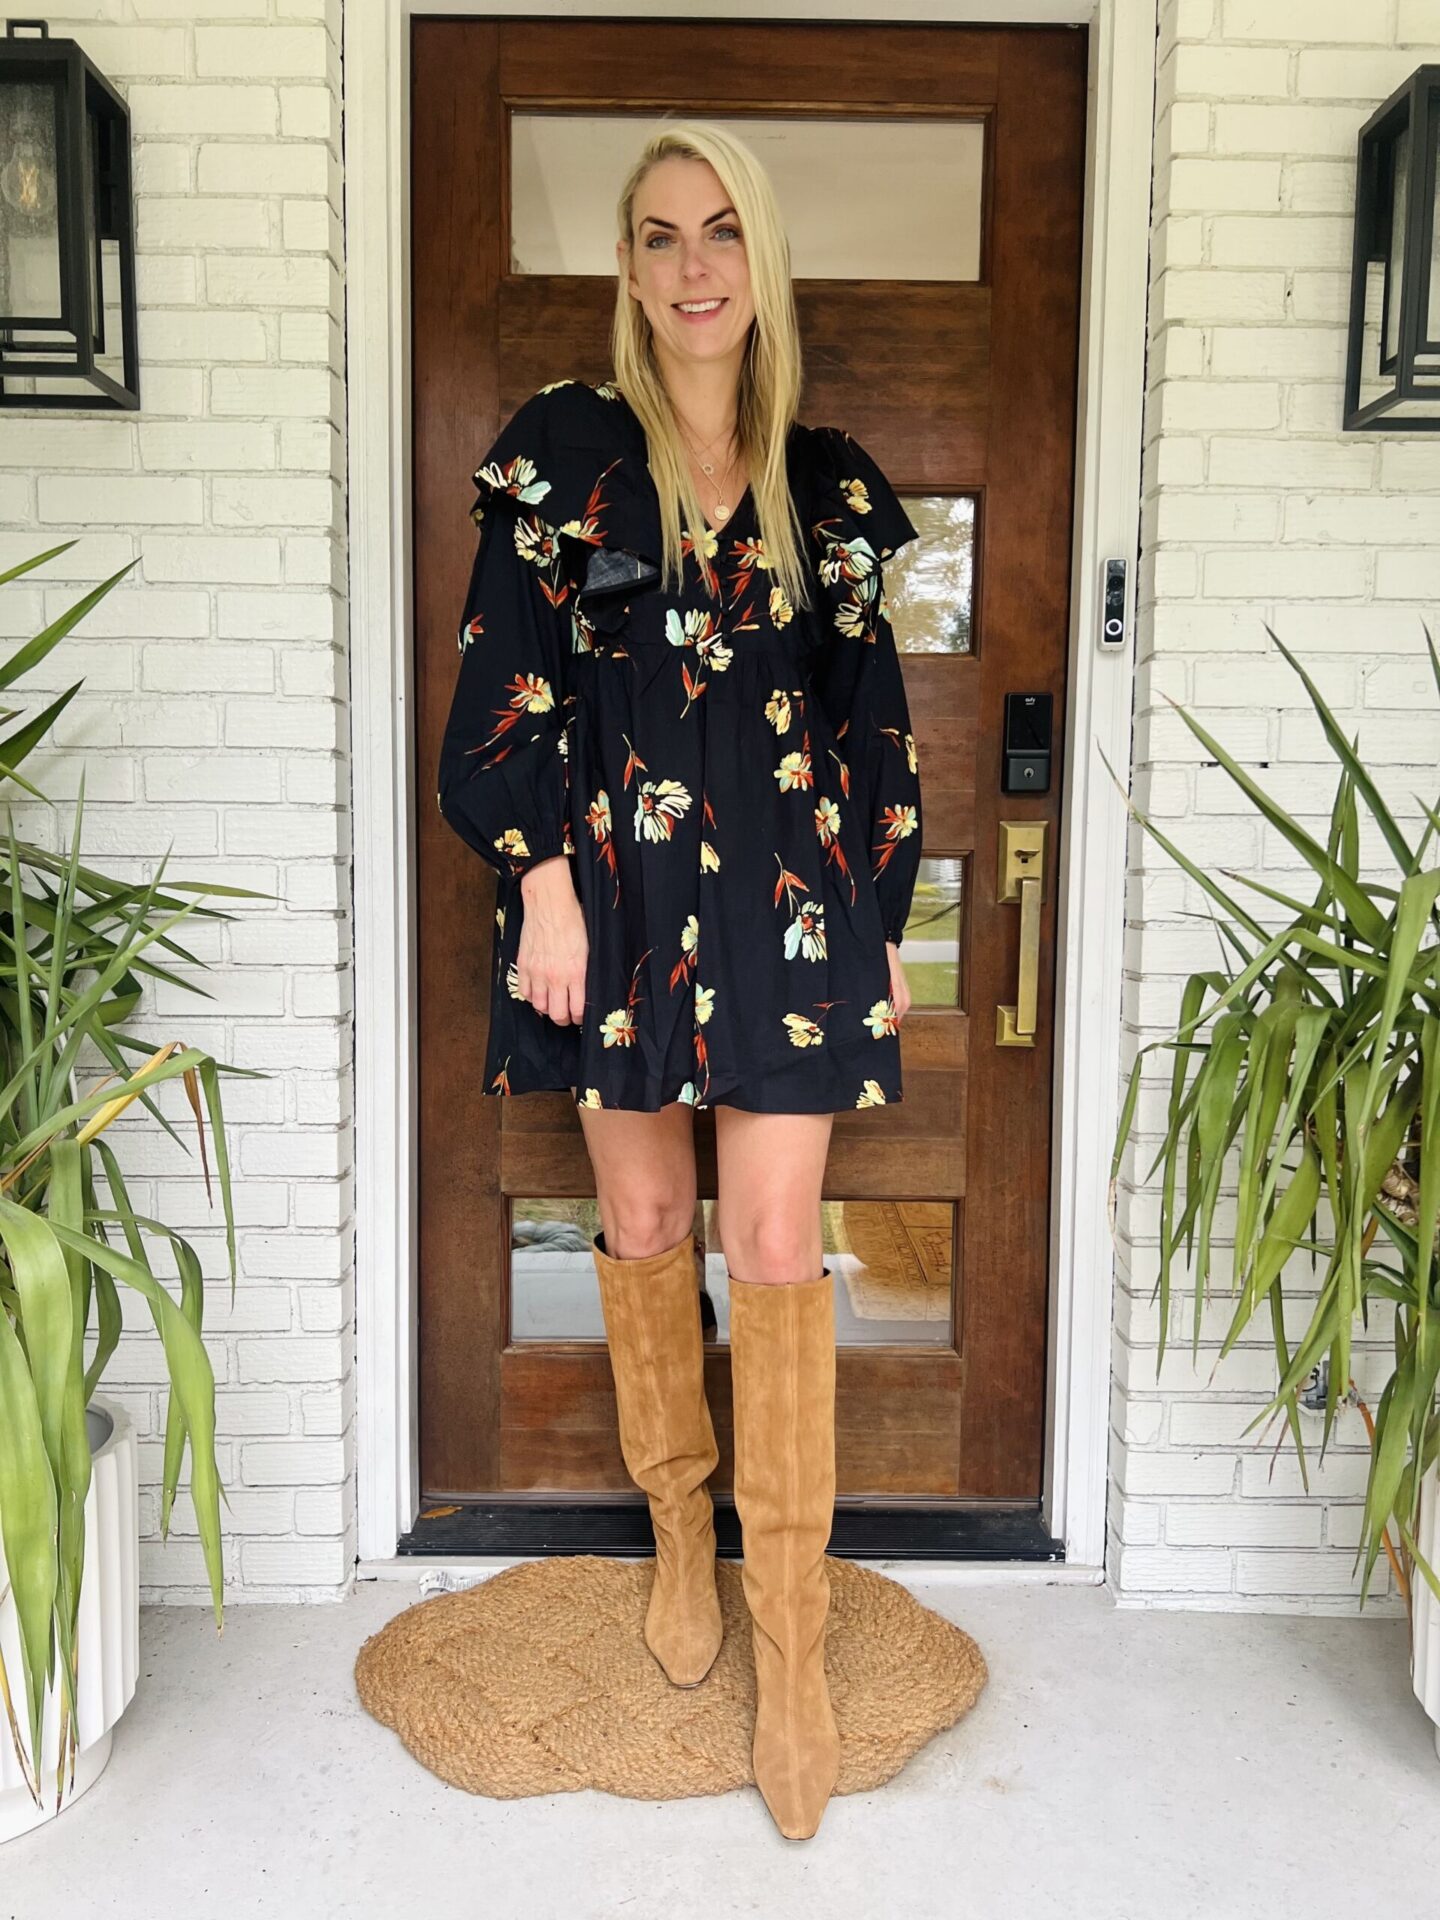 ShopBop dress and boots